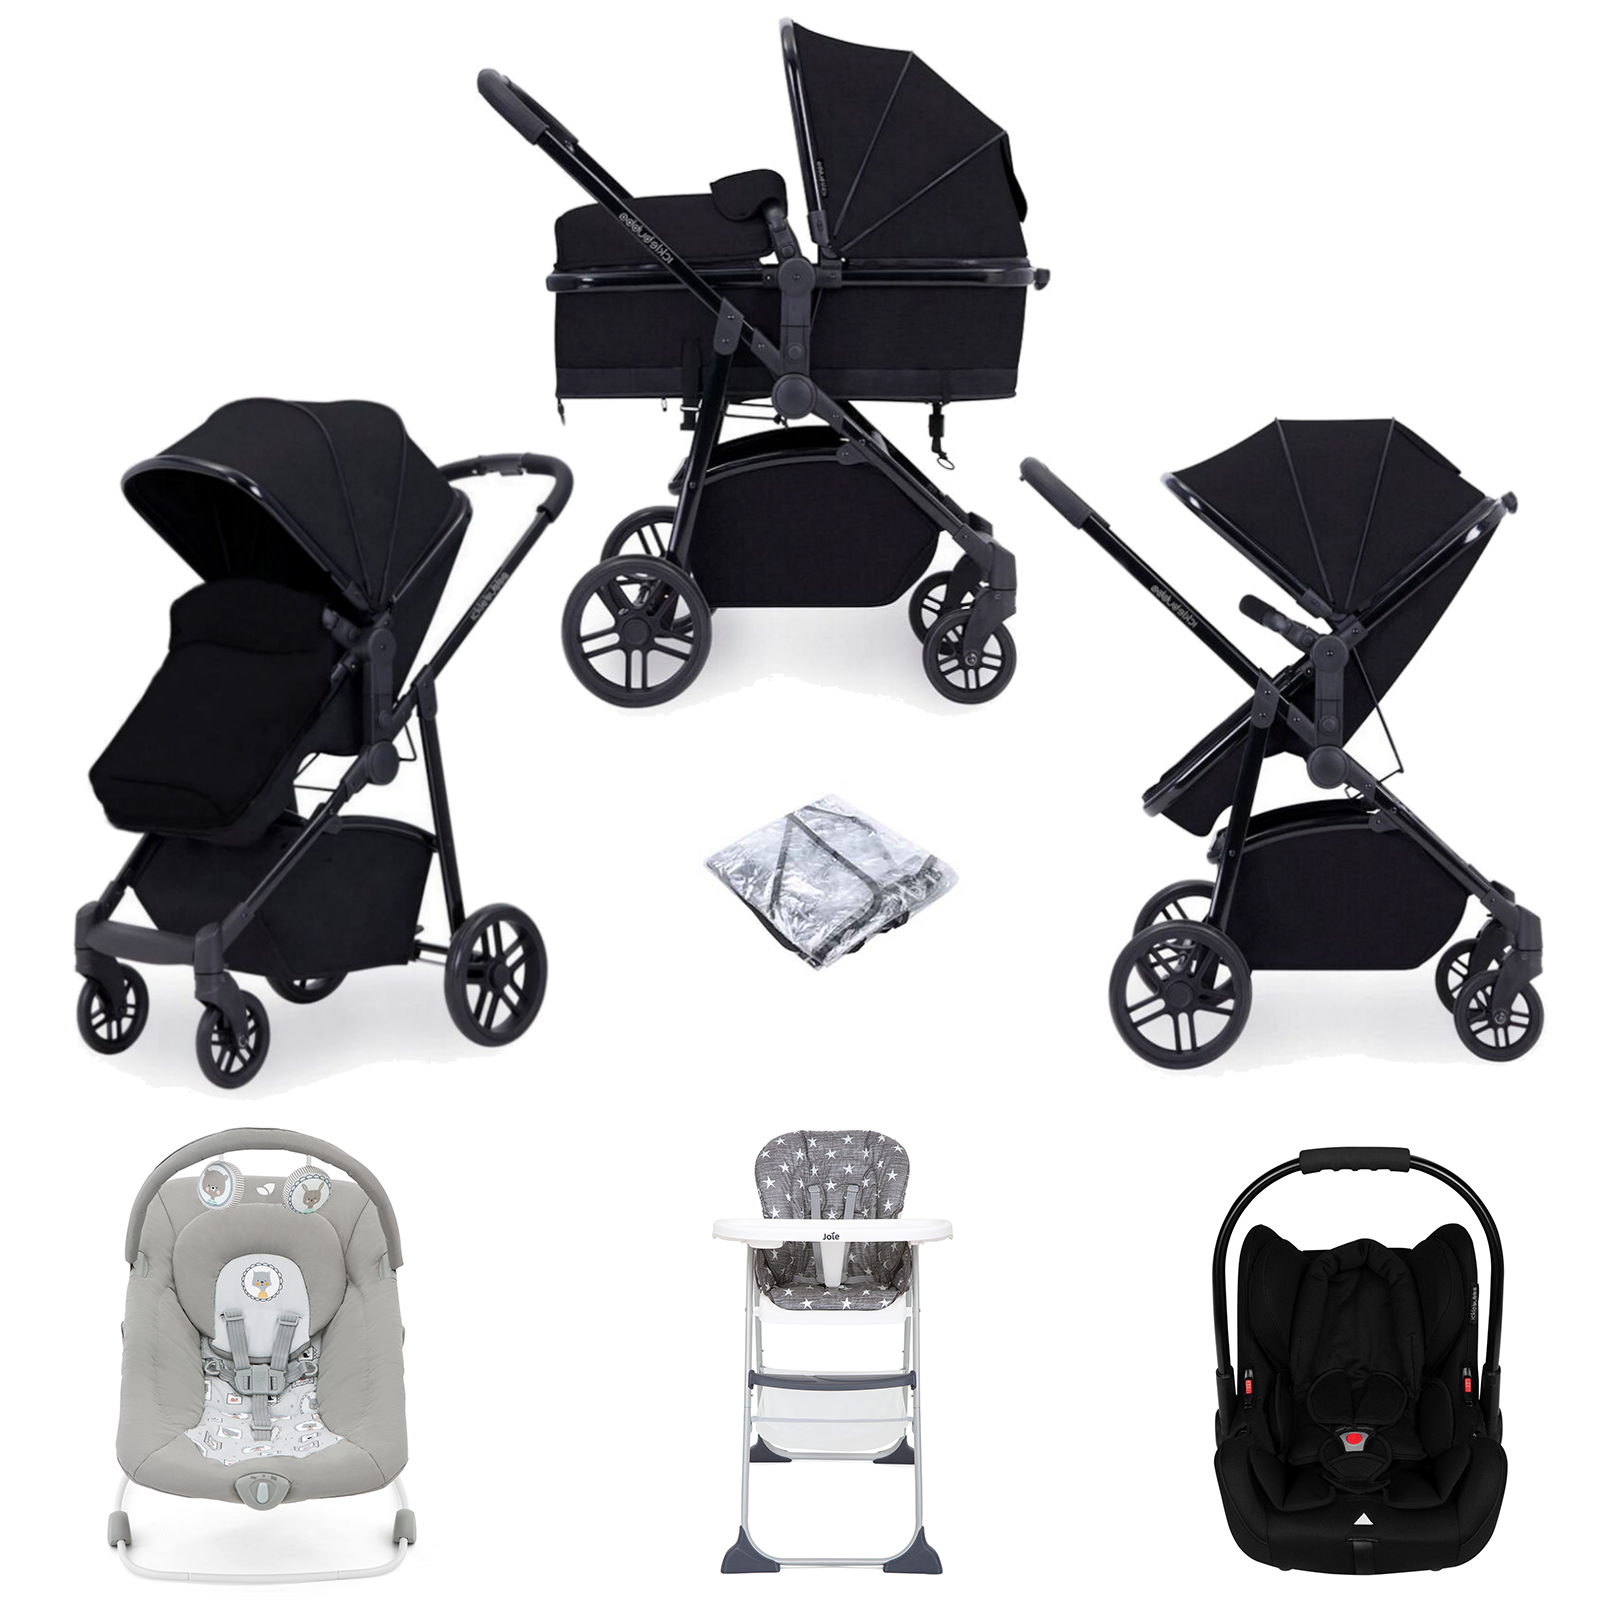 Ickle Bubba Moon (Astral) 6 Piece Travel System Bundle - Black